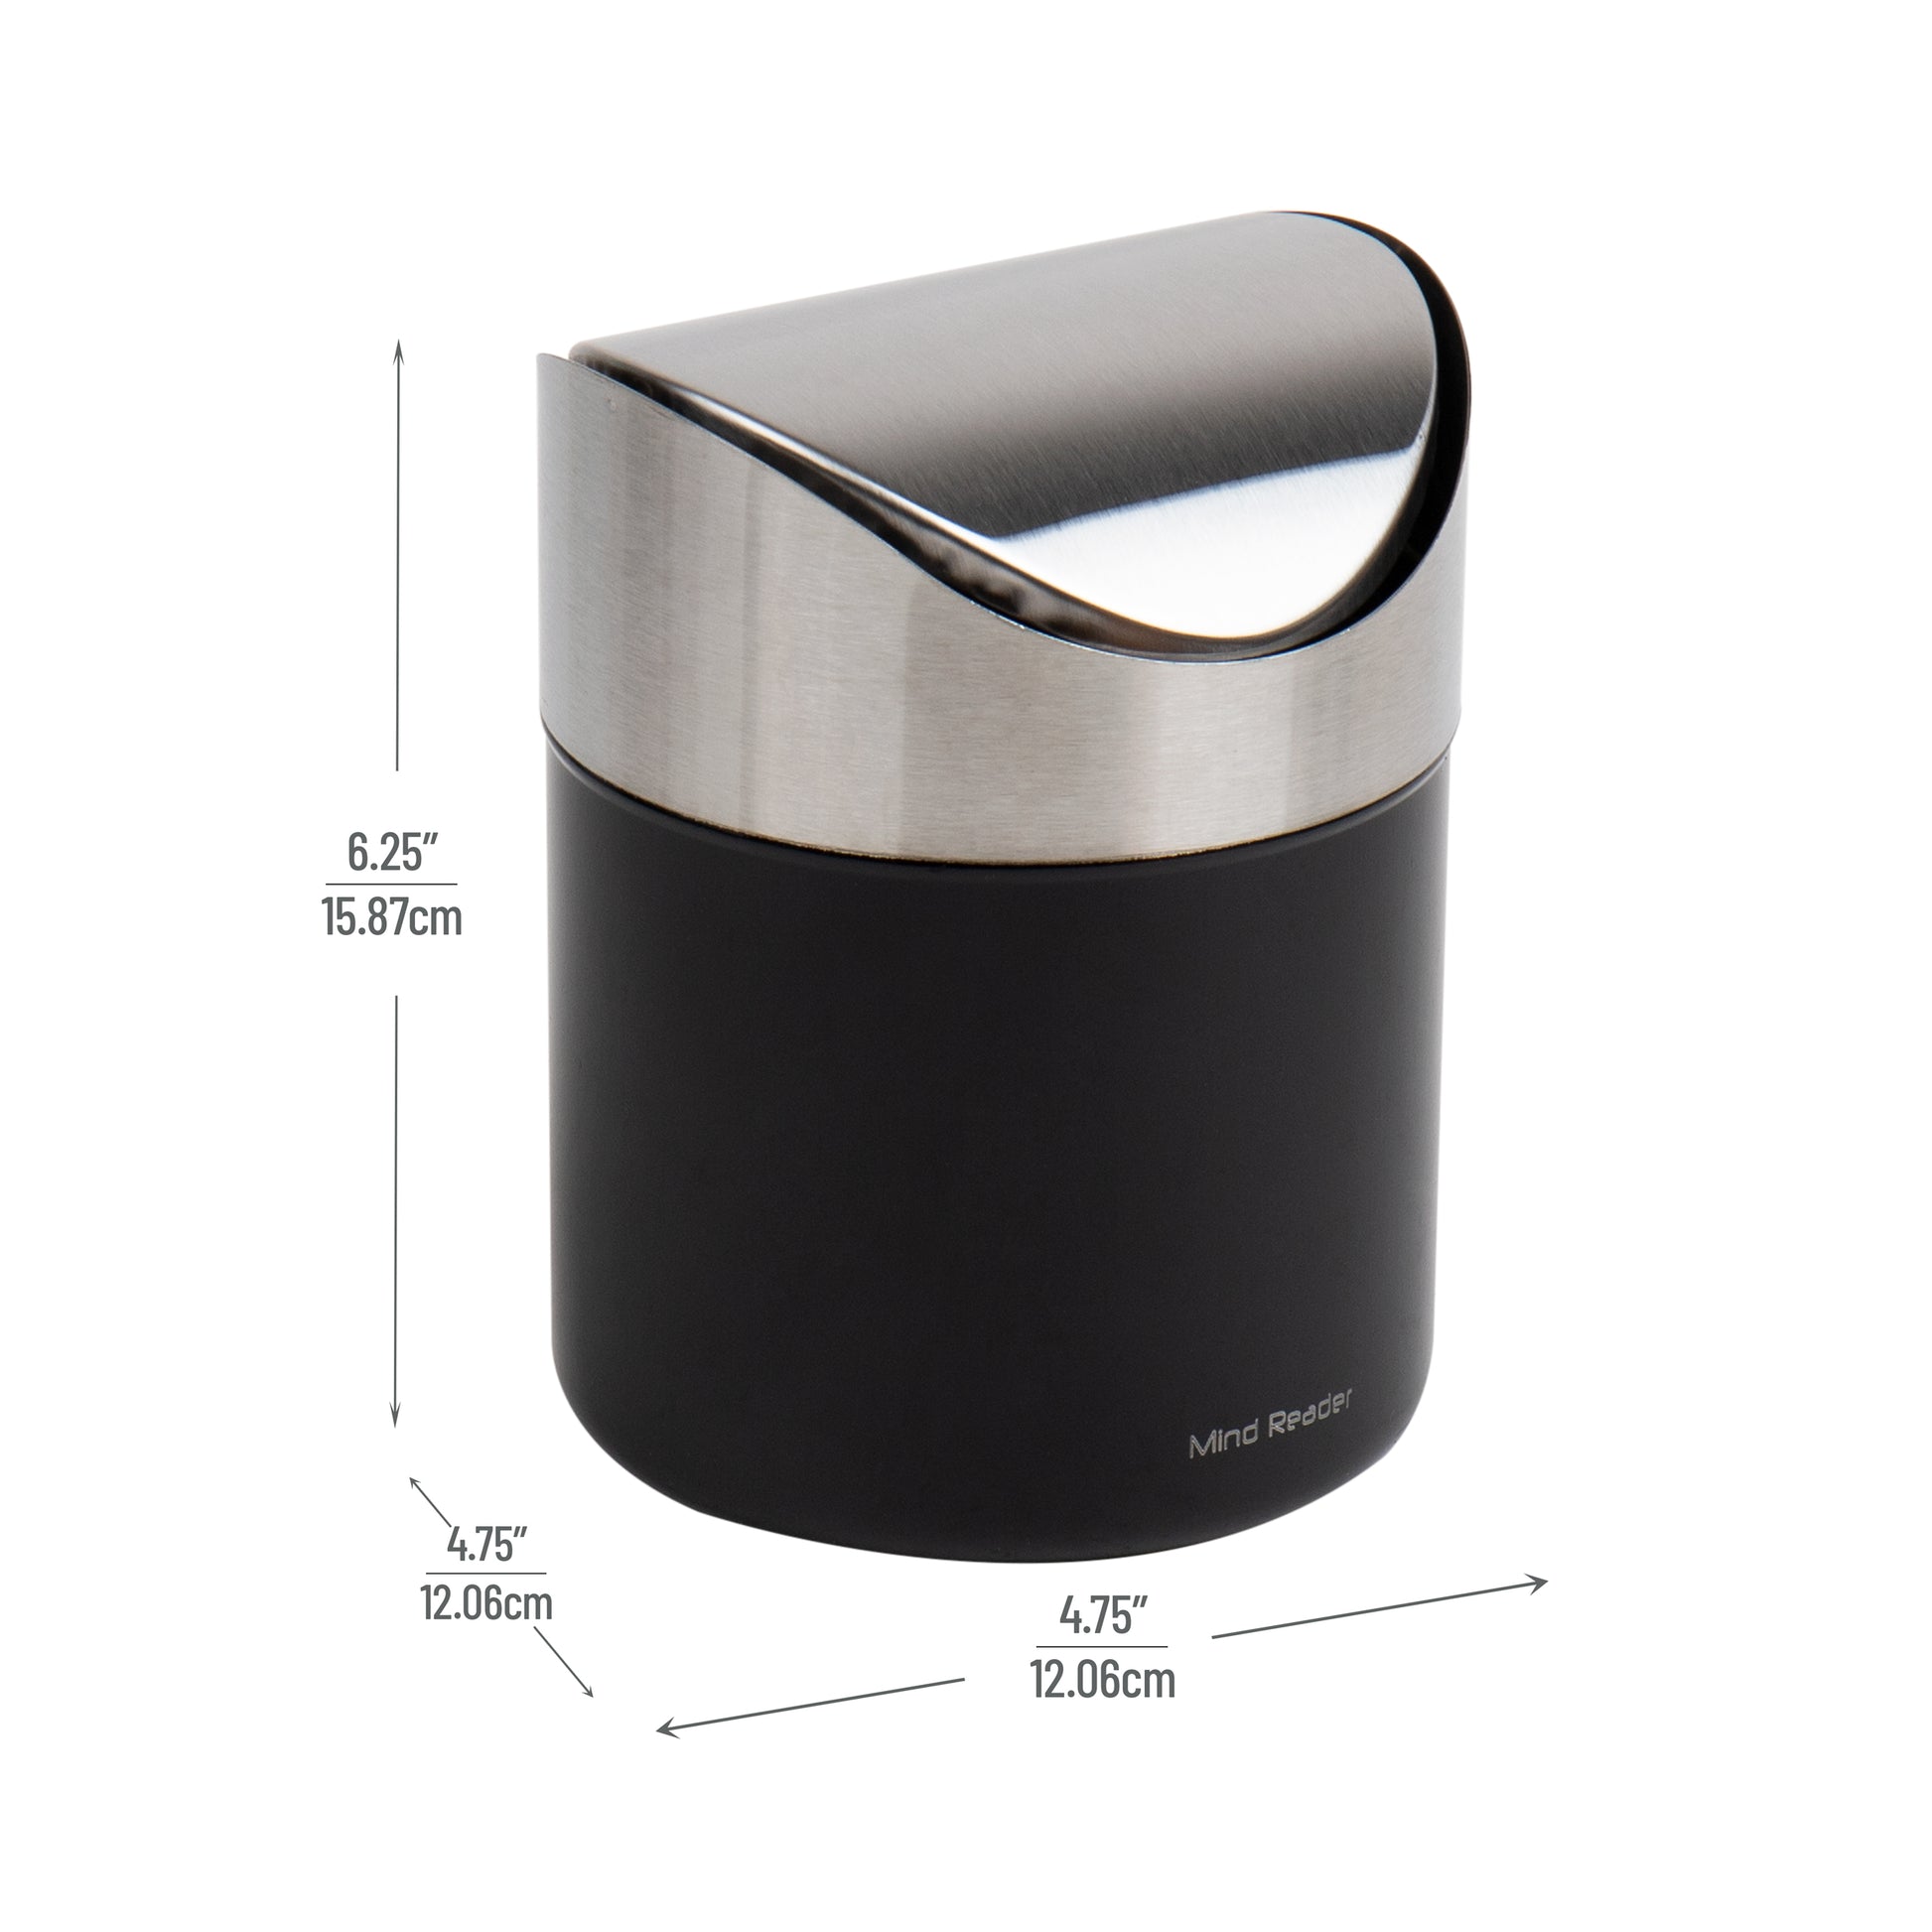 RW Clean Stainless Steel Mini Trash Can - Countertop - 4 3/4 x 4 3/4 x 7  - 1 count box